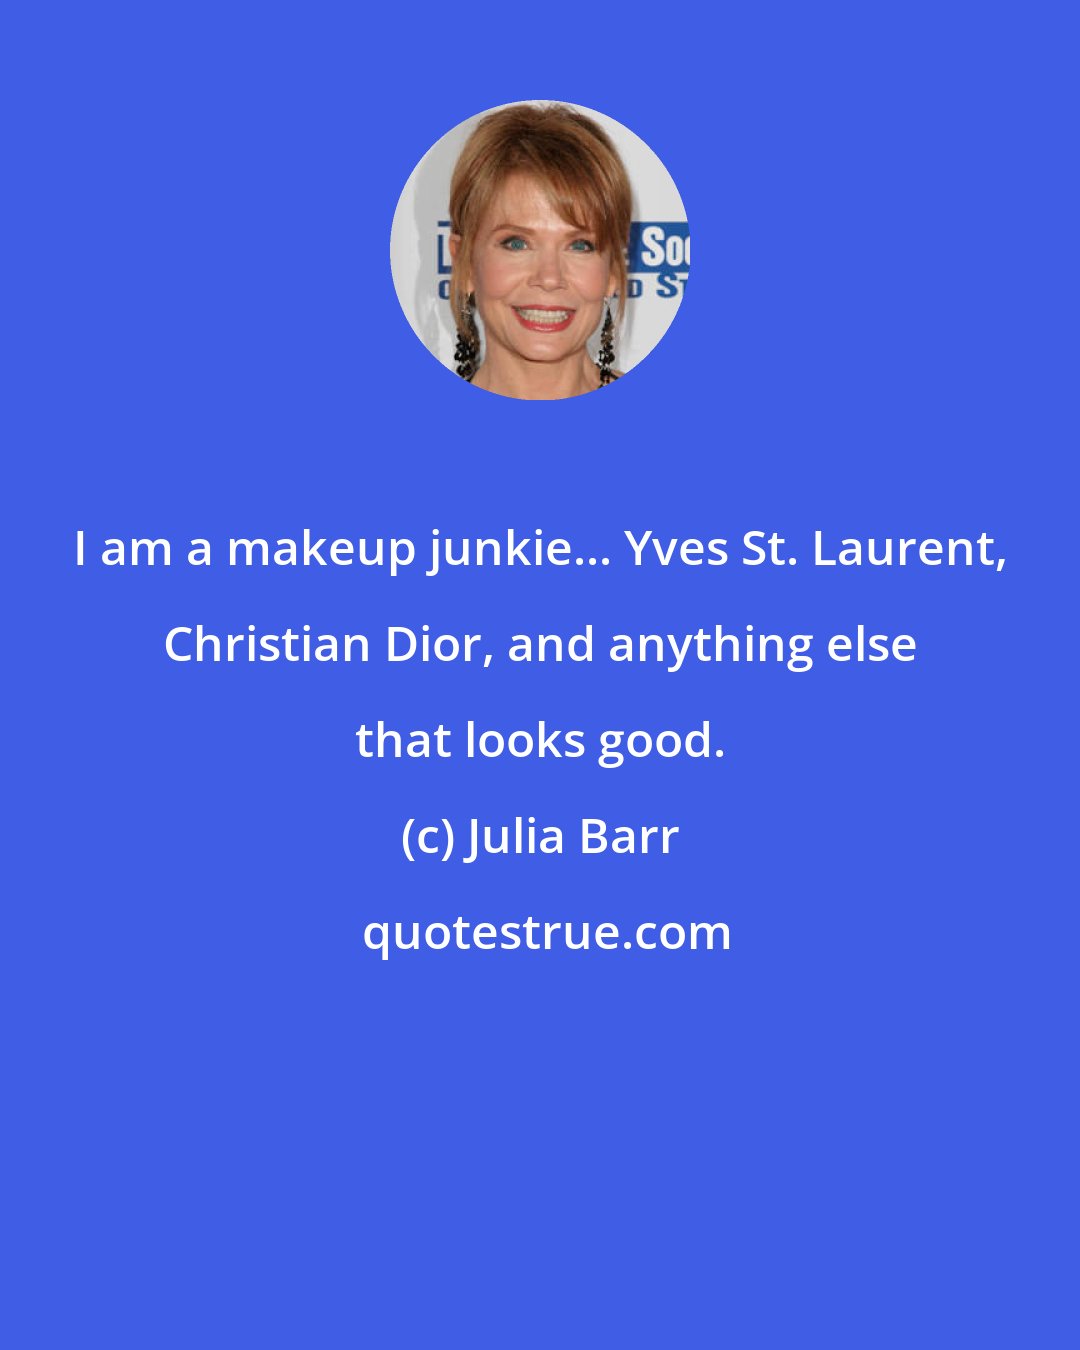 Julia Barr: I am a makeup junkie... Yves St. Laurent, Christian Dior, and anything else that looks good.